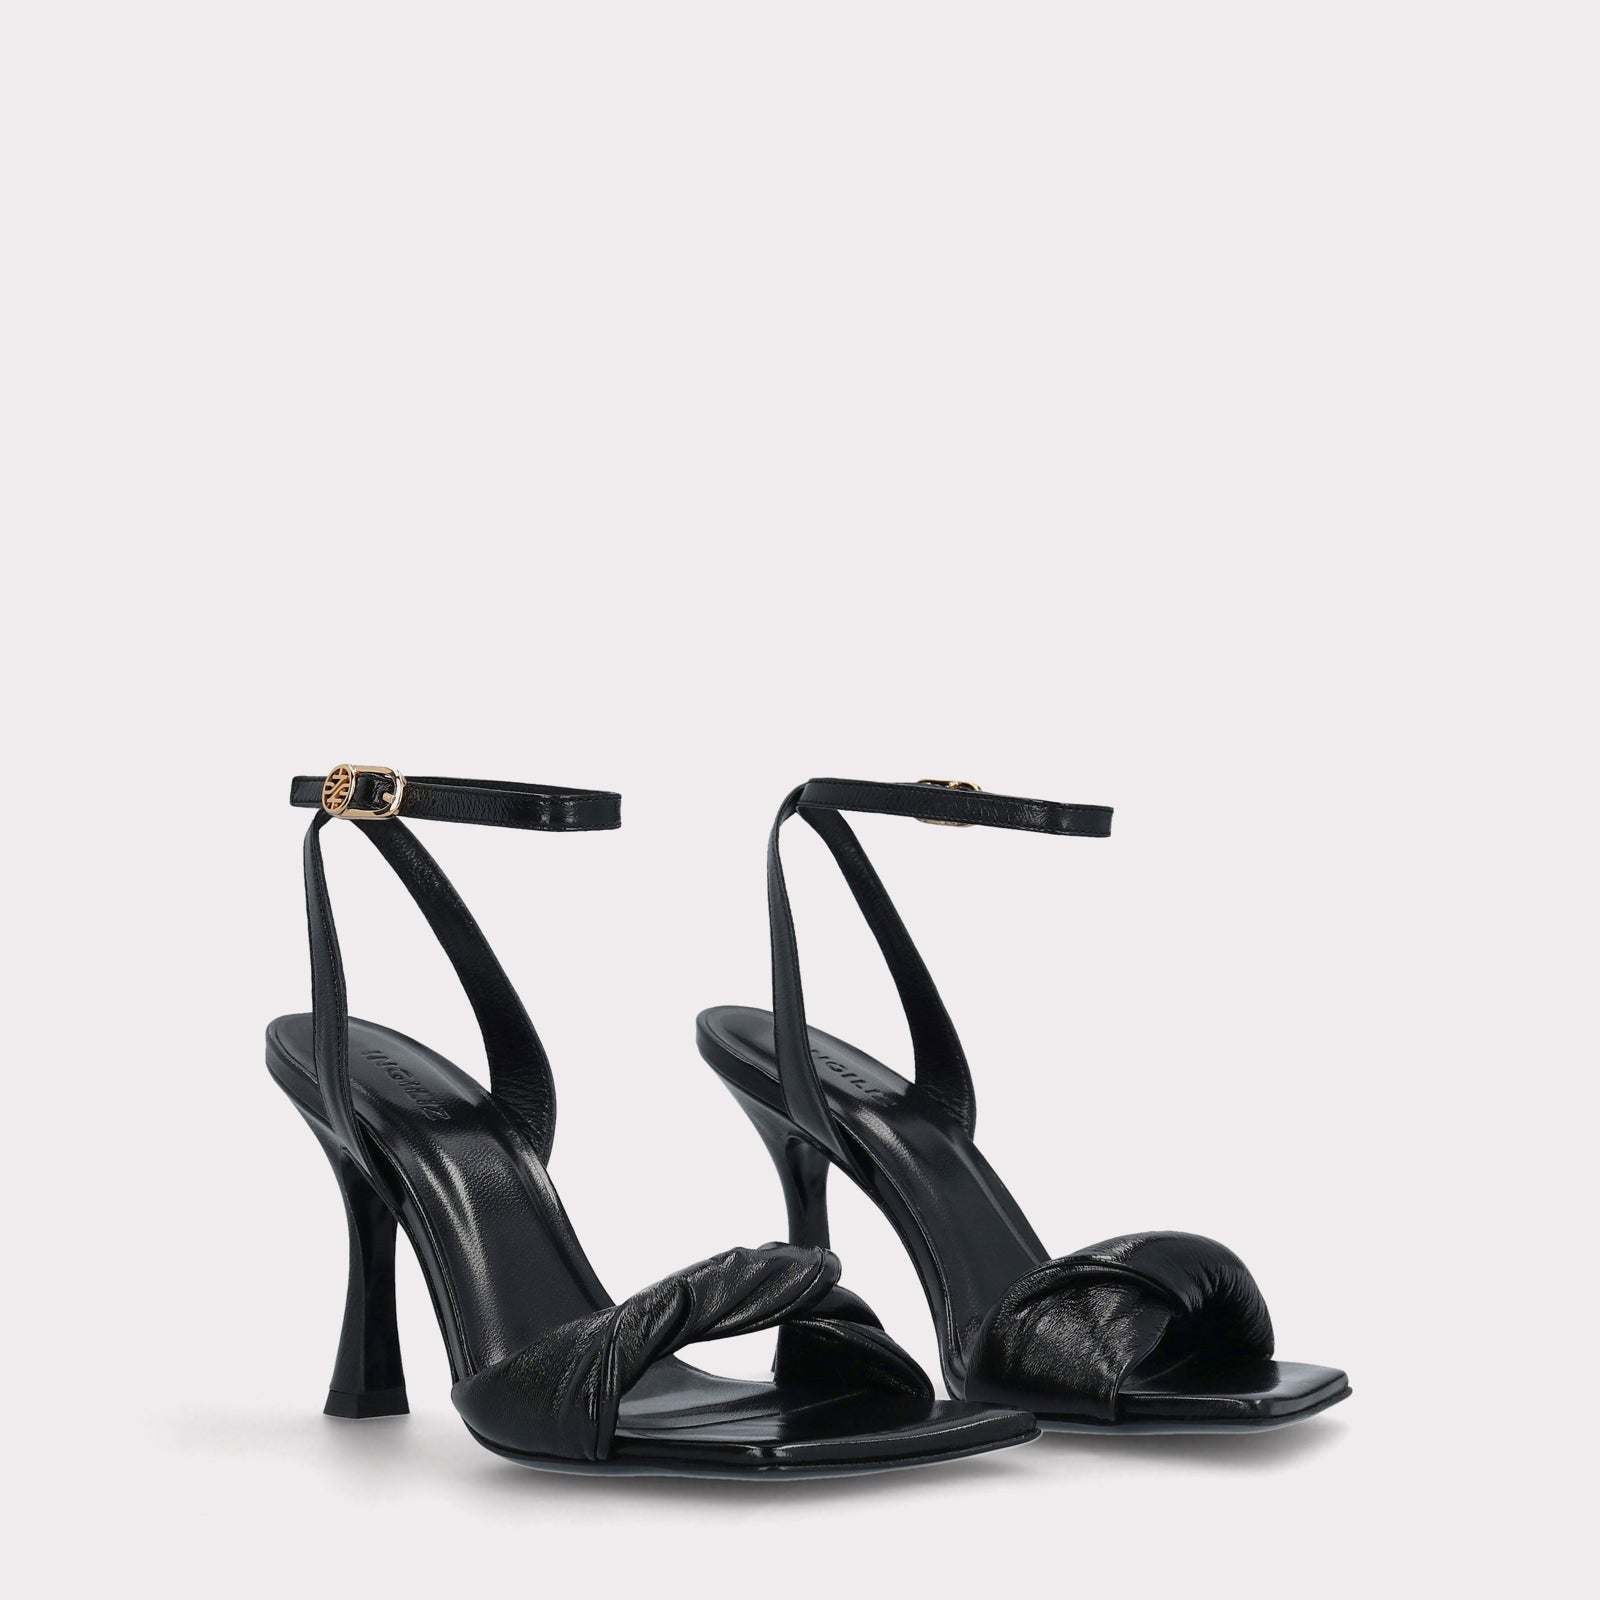 BETTY 31 BLACK LEATHER SANDALS